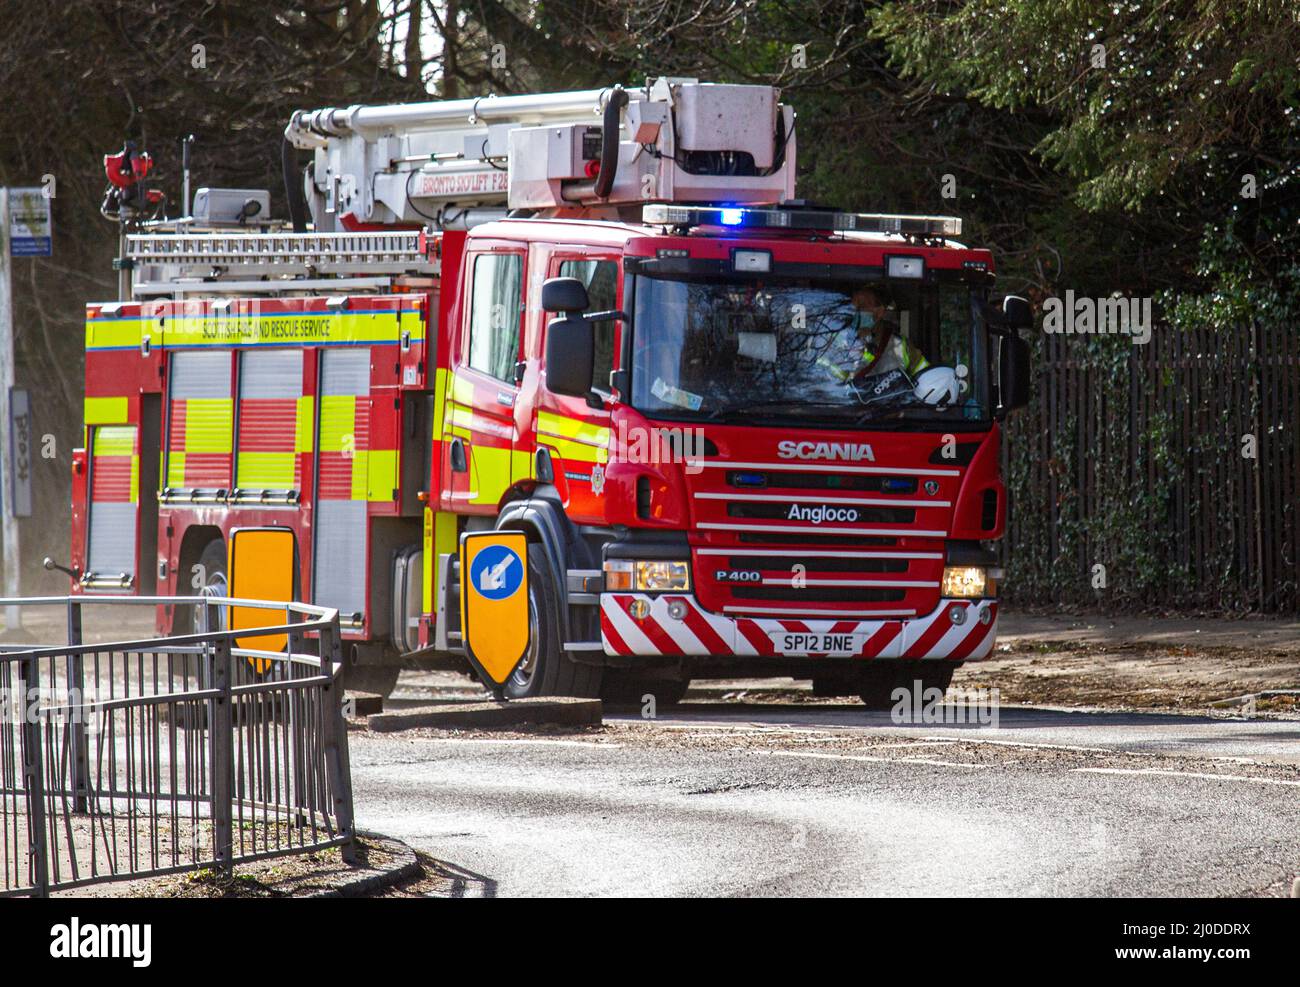 A Scottish Fire and Rescue Service fire engine responds at high speed to an emergency 999 call along MacAlpine Road in Ardler, Dundee, Scotland. Stock Photo